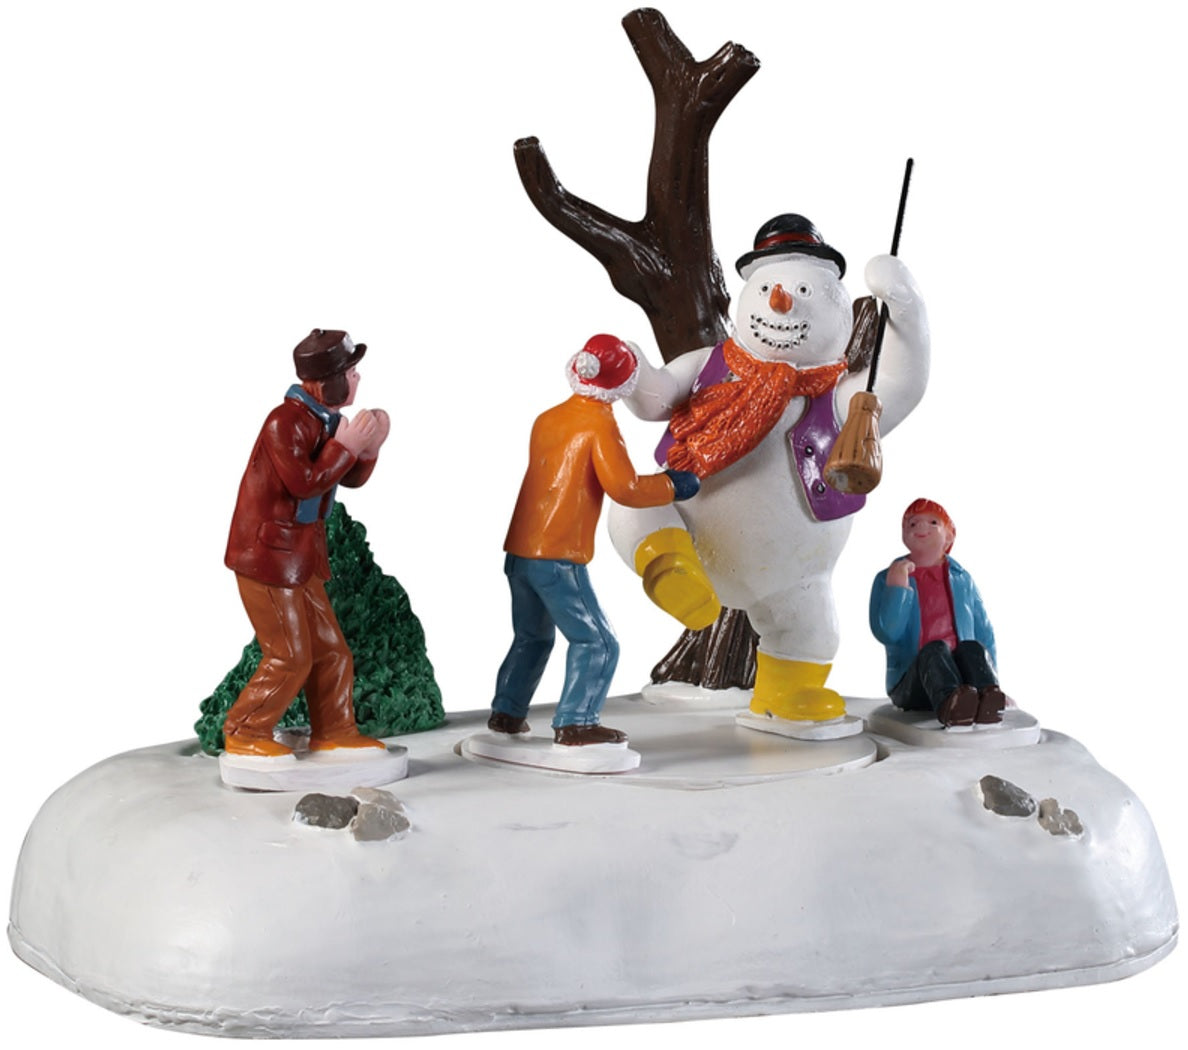 Lemax 94529 Frosty Frolic Christmas Village Accessory, Multicolored